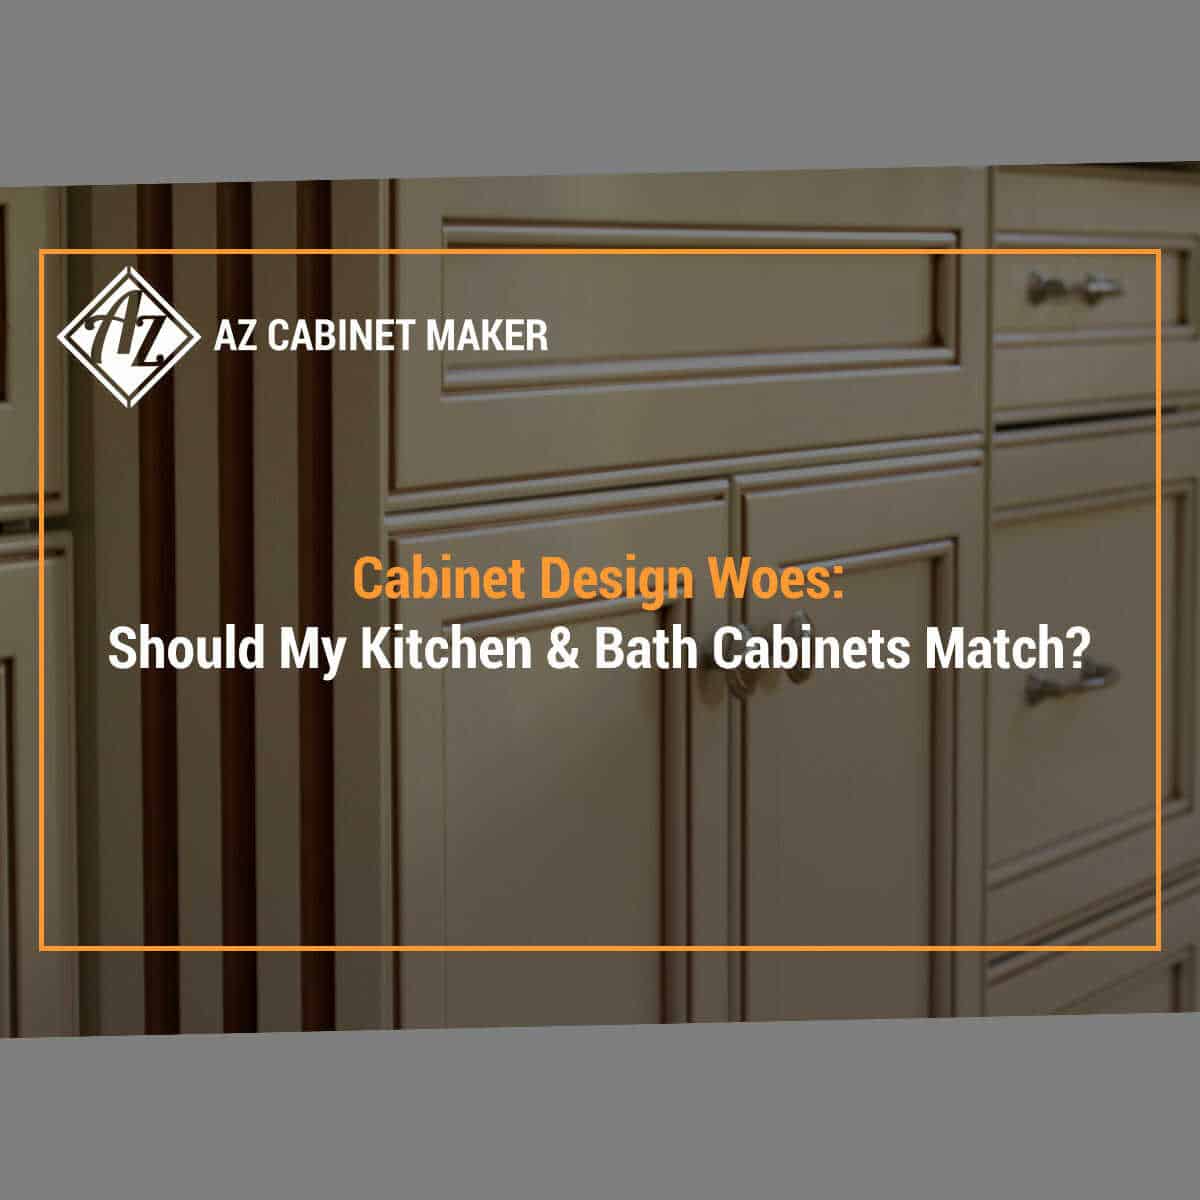 Cabinet Design Woes: Should My Kitchen & Bath Cabinets Match?